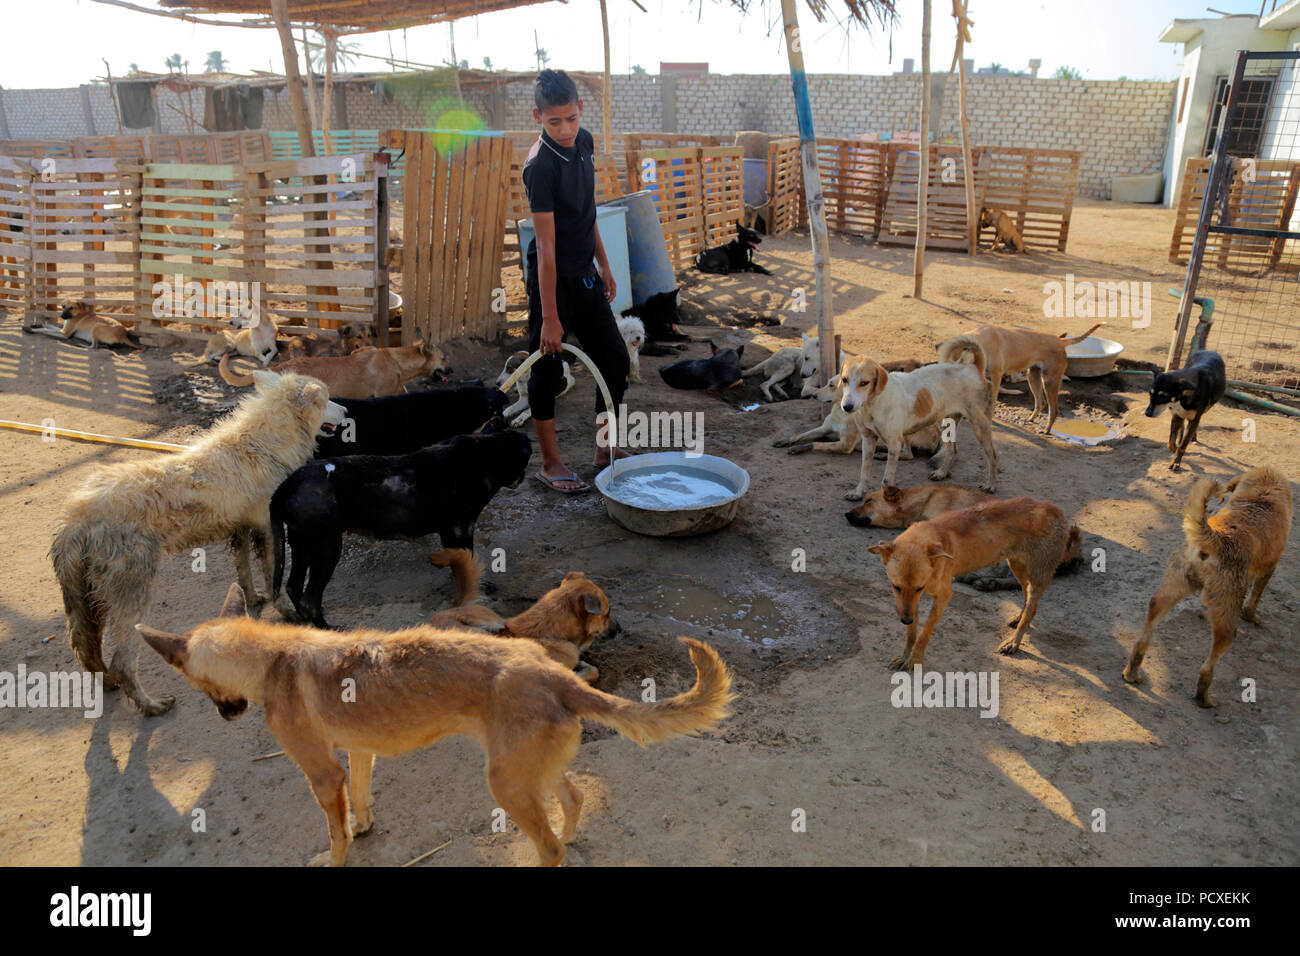 Giza, Egypt. 4th Aug, 2018. Dogs are seen at a dog shelter in Giza, Egypt,  on July 5, 2018. With "the Voice of the Voiceless" as its slogan, Cairo  Animal Rescue Team (